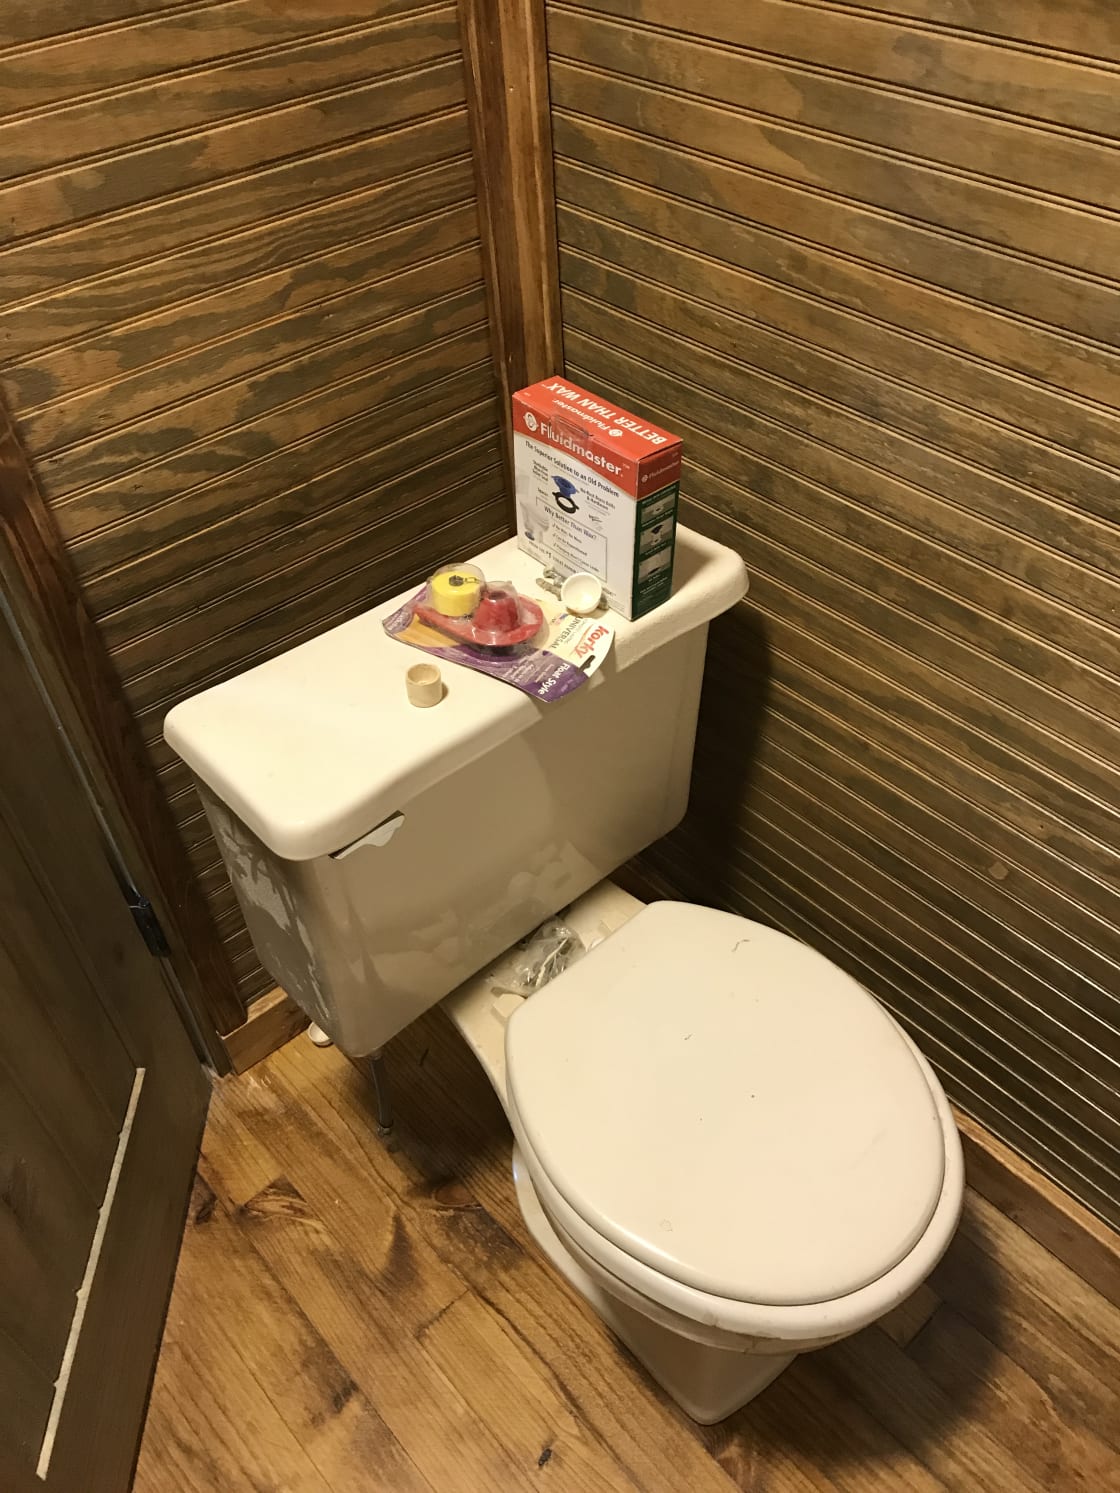 commode in bathroom